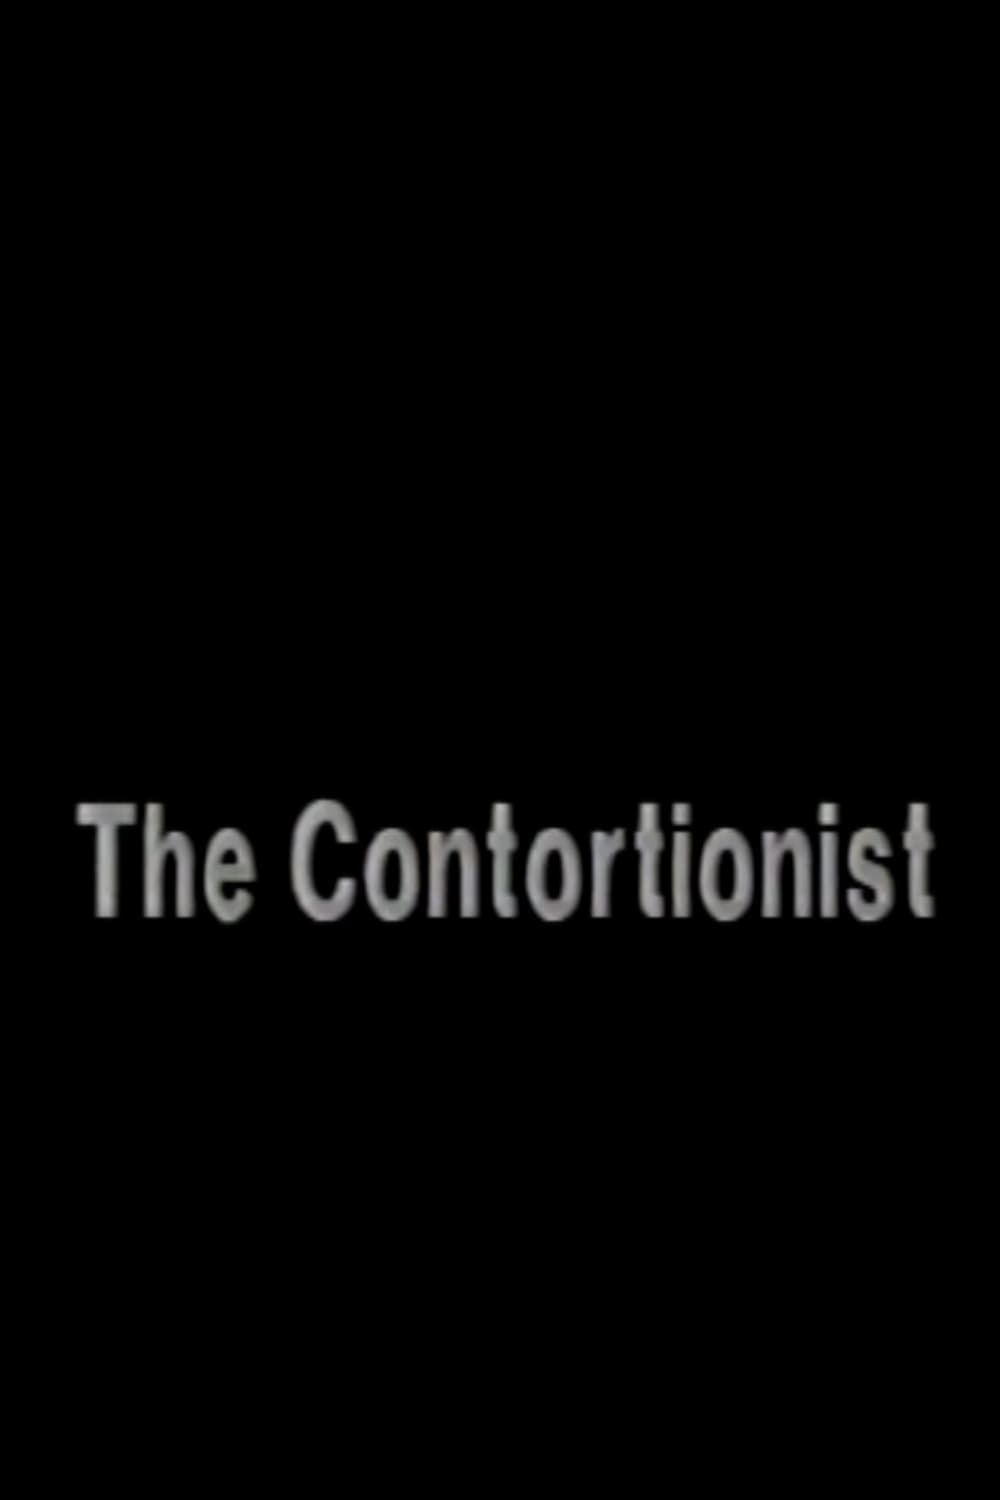 The Contortionist